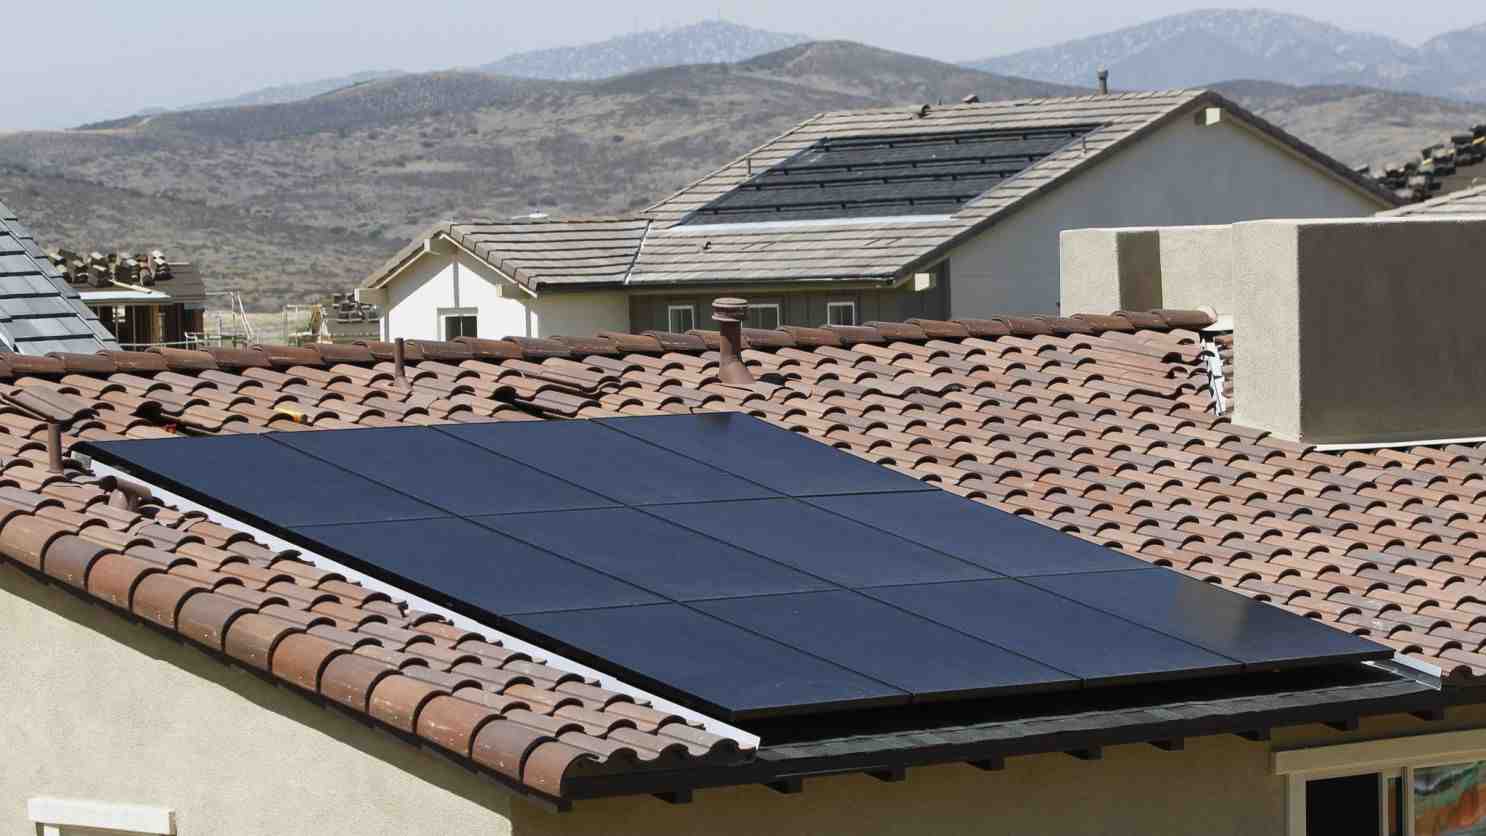 How long does it take to get solar permit in California?